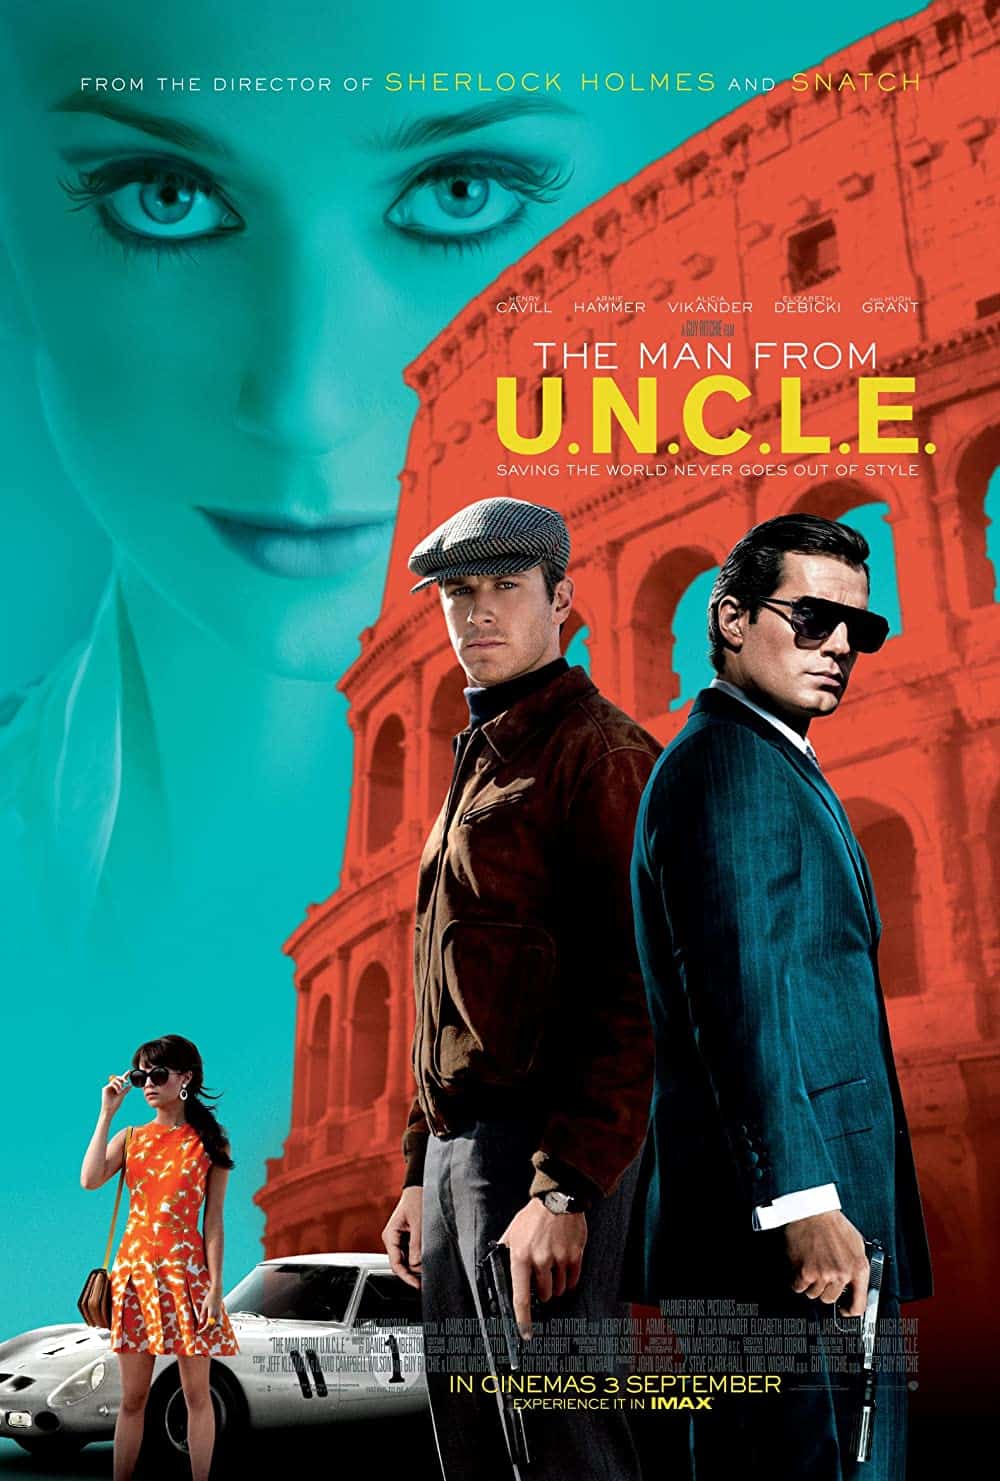 The Man from UNCLE (2015)